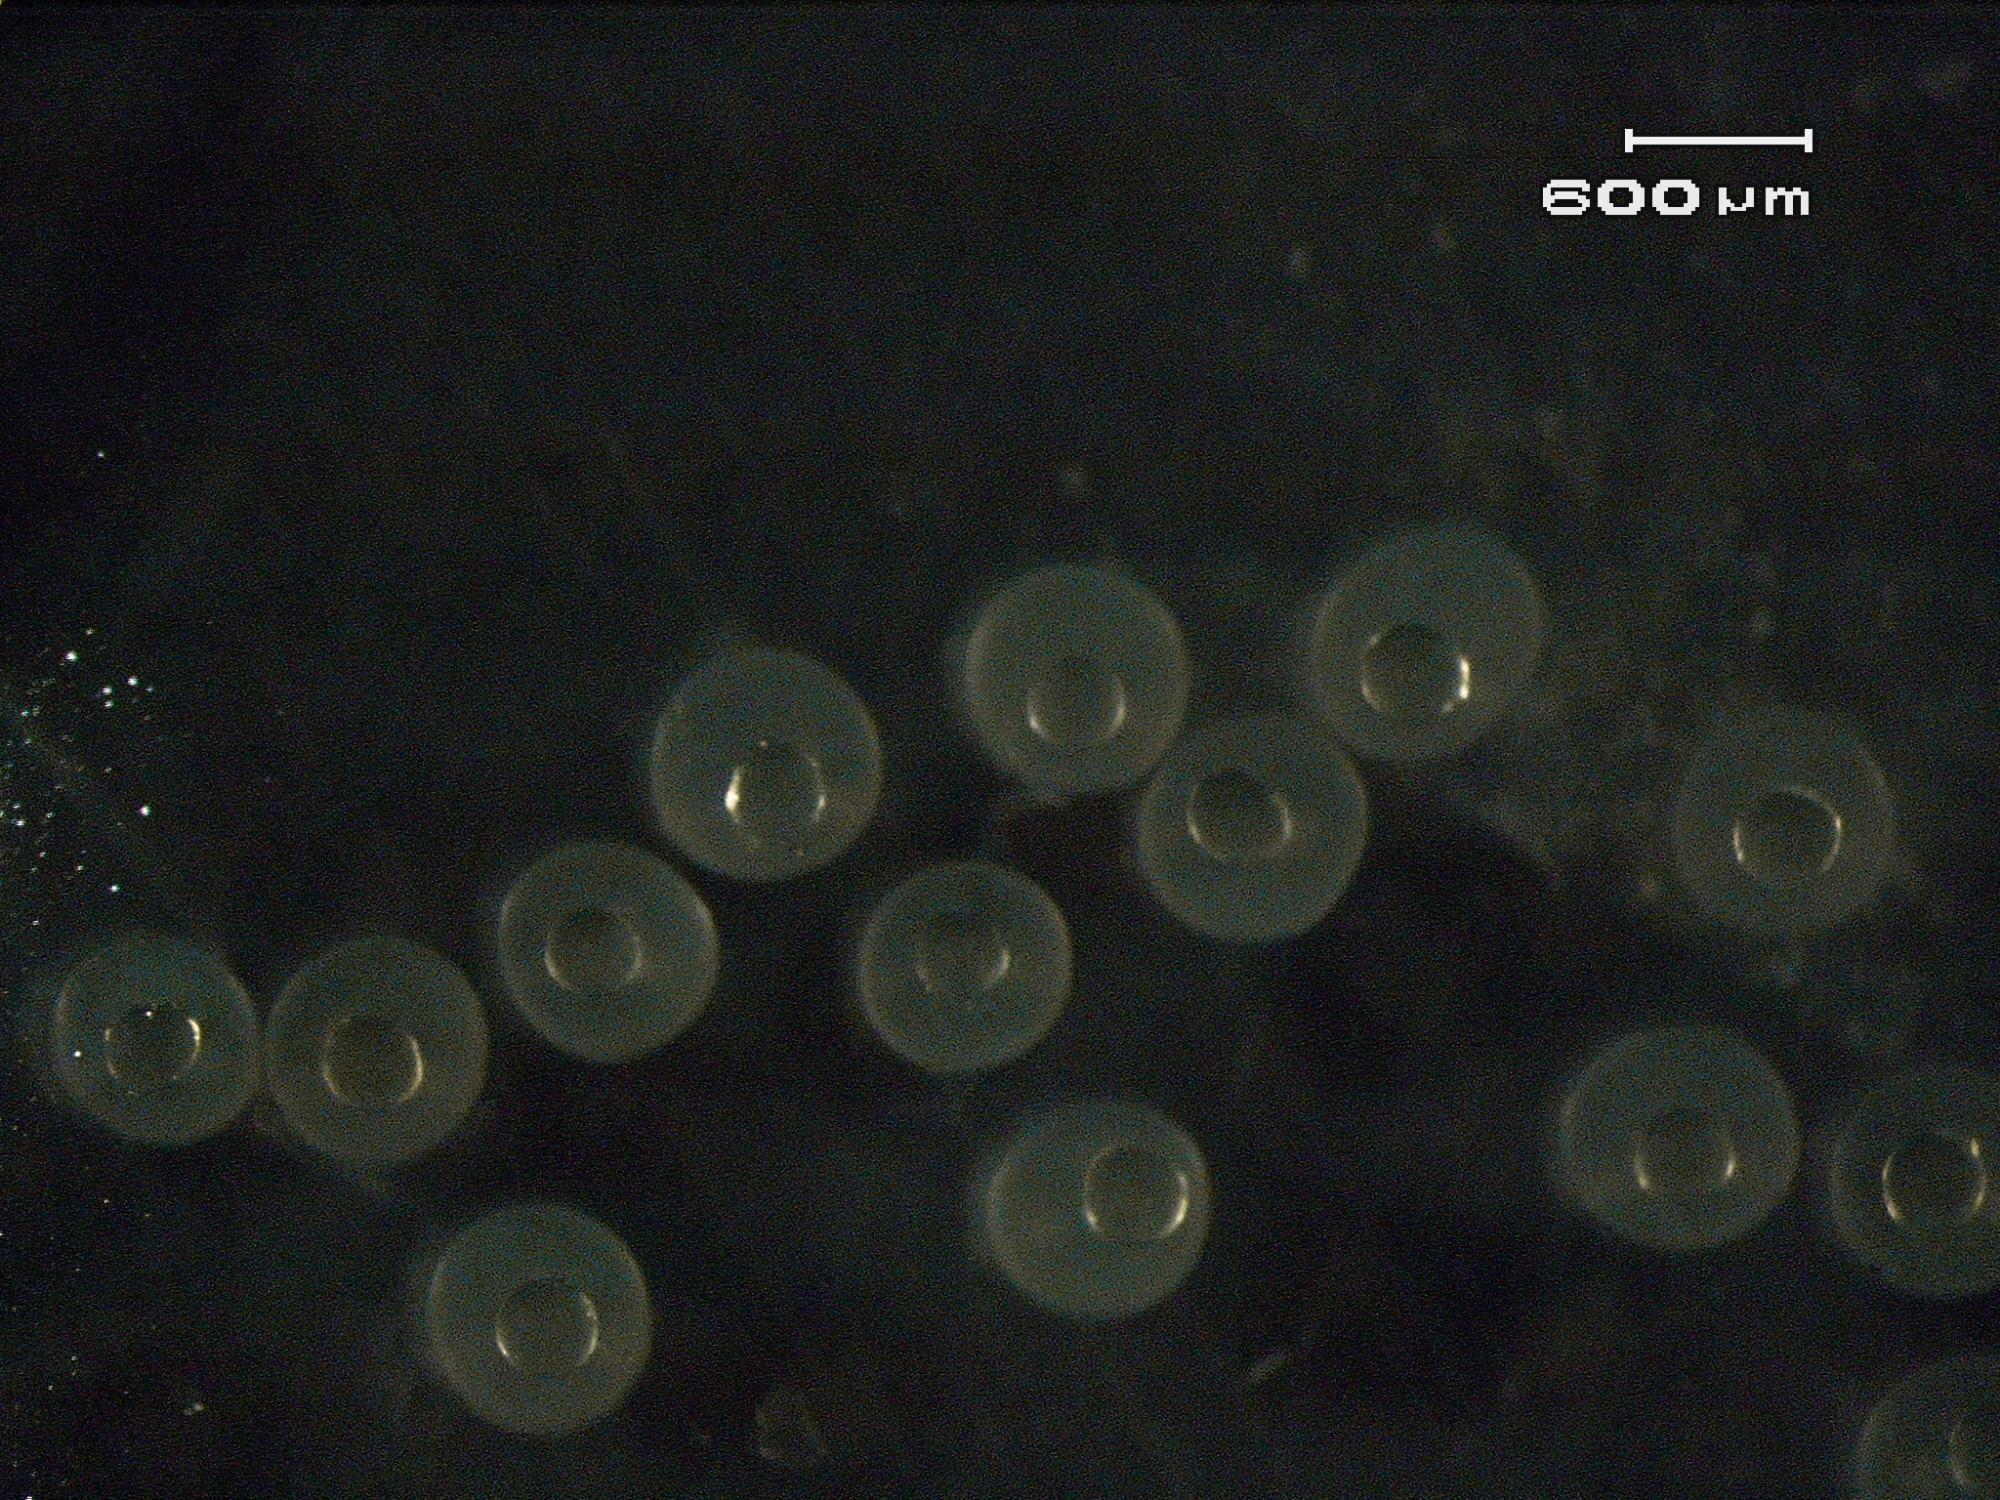 unfertilized burbot eggs that are about 3 days before final maturation and spawning